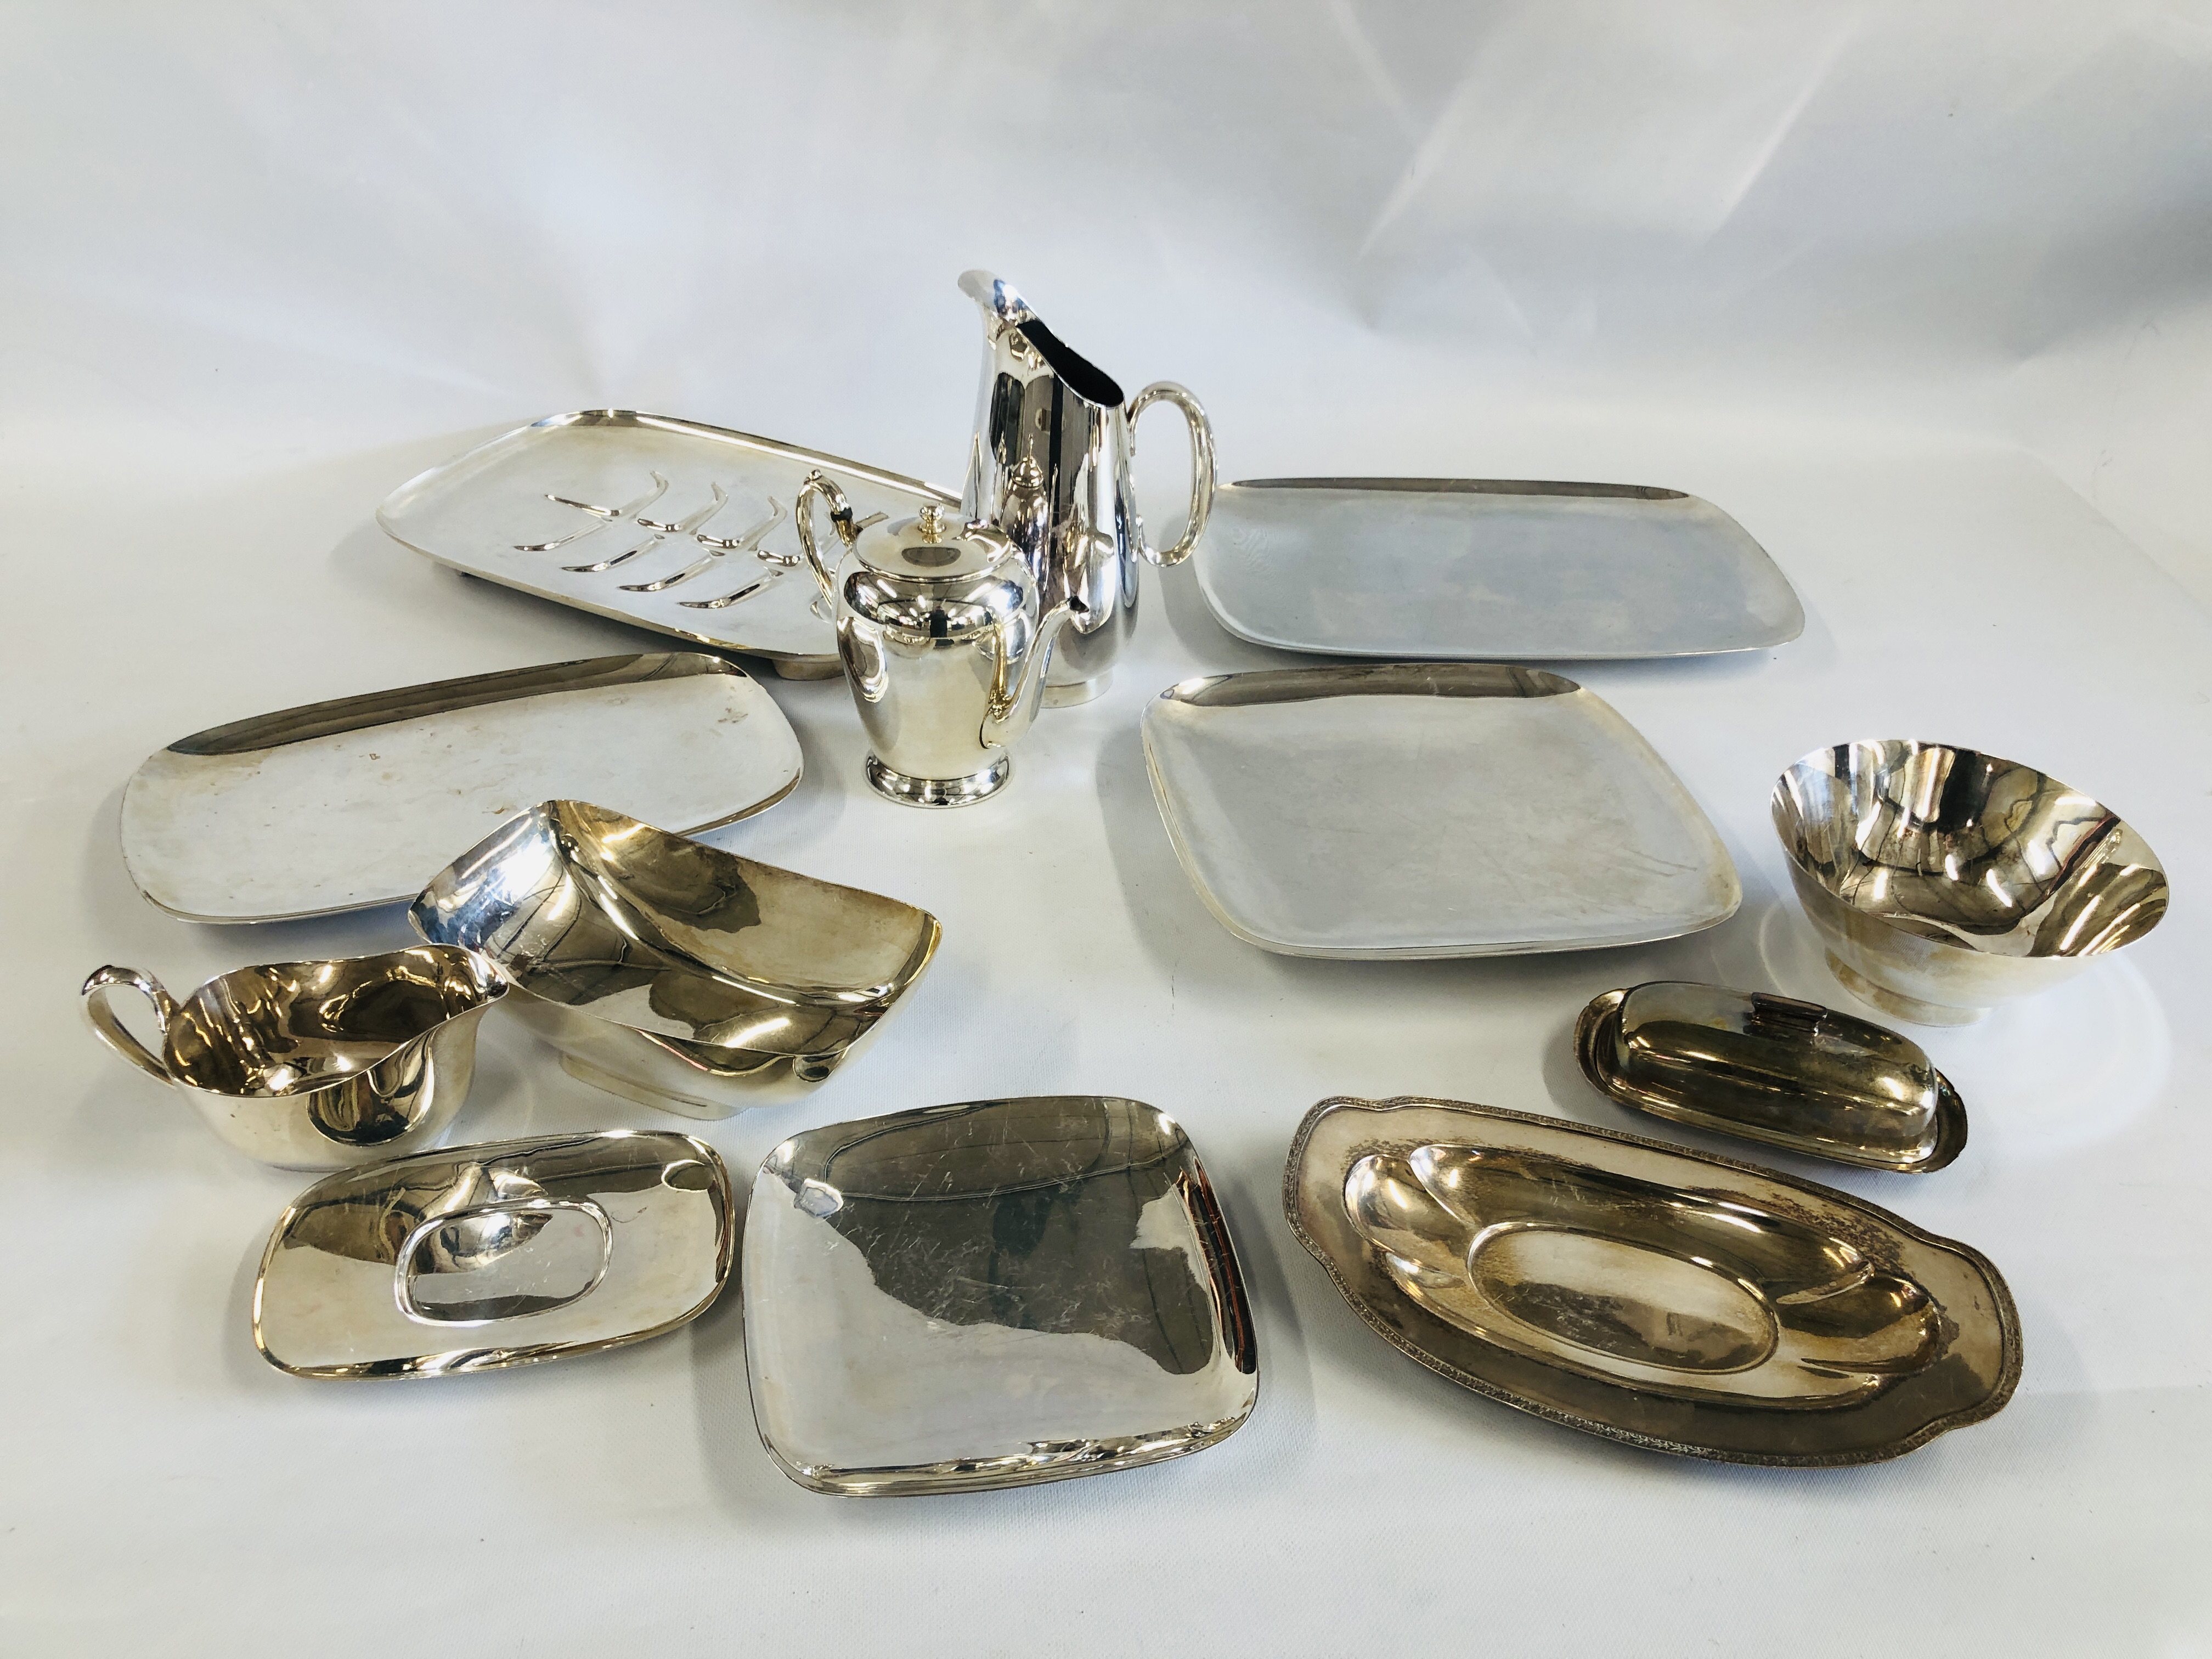 A COLLECTION OF APPROX 11 PIECES OF GOOD QUALITY PLATED WARE MARKED "REED & BARTON" ALONG WITH AN